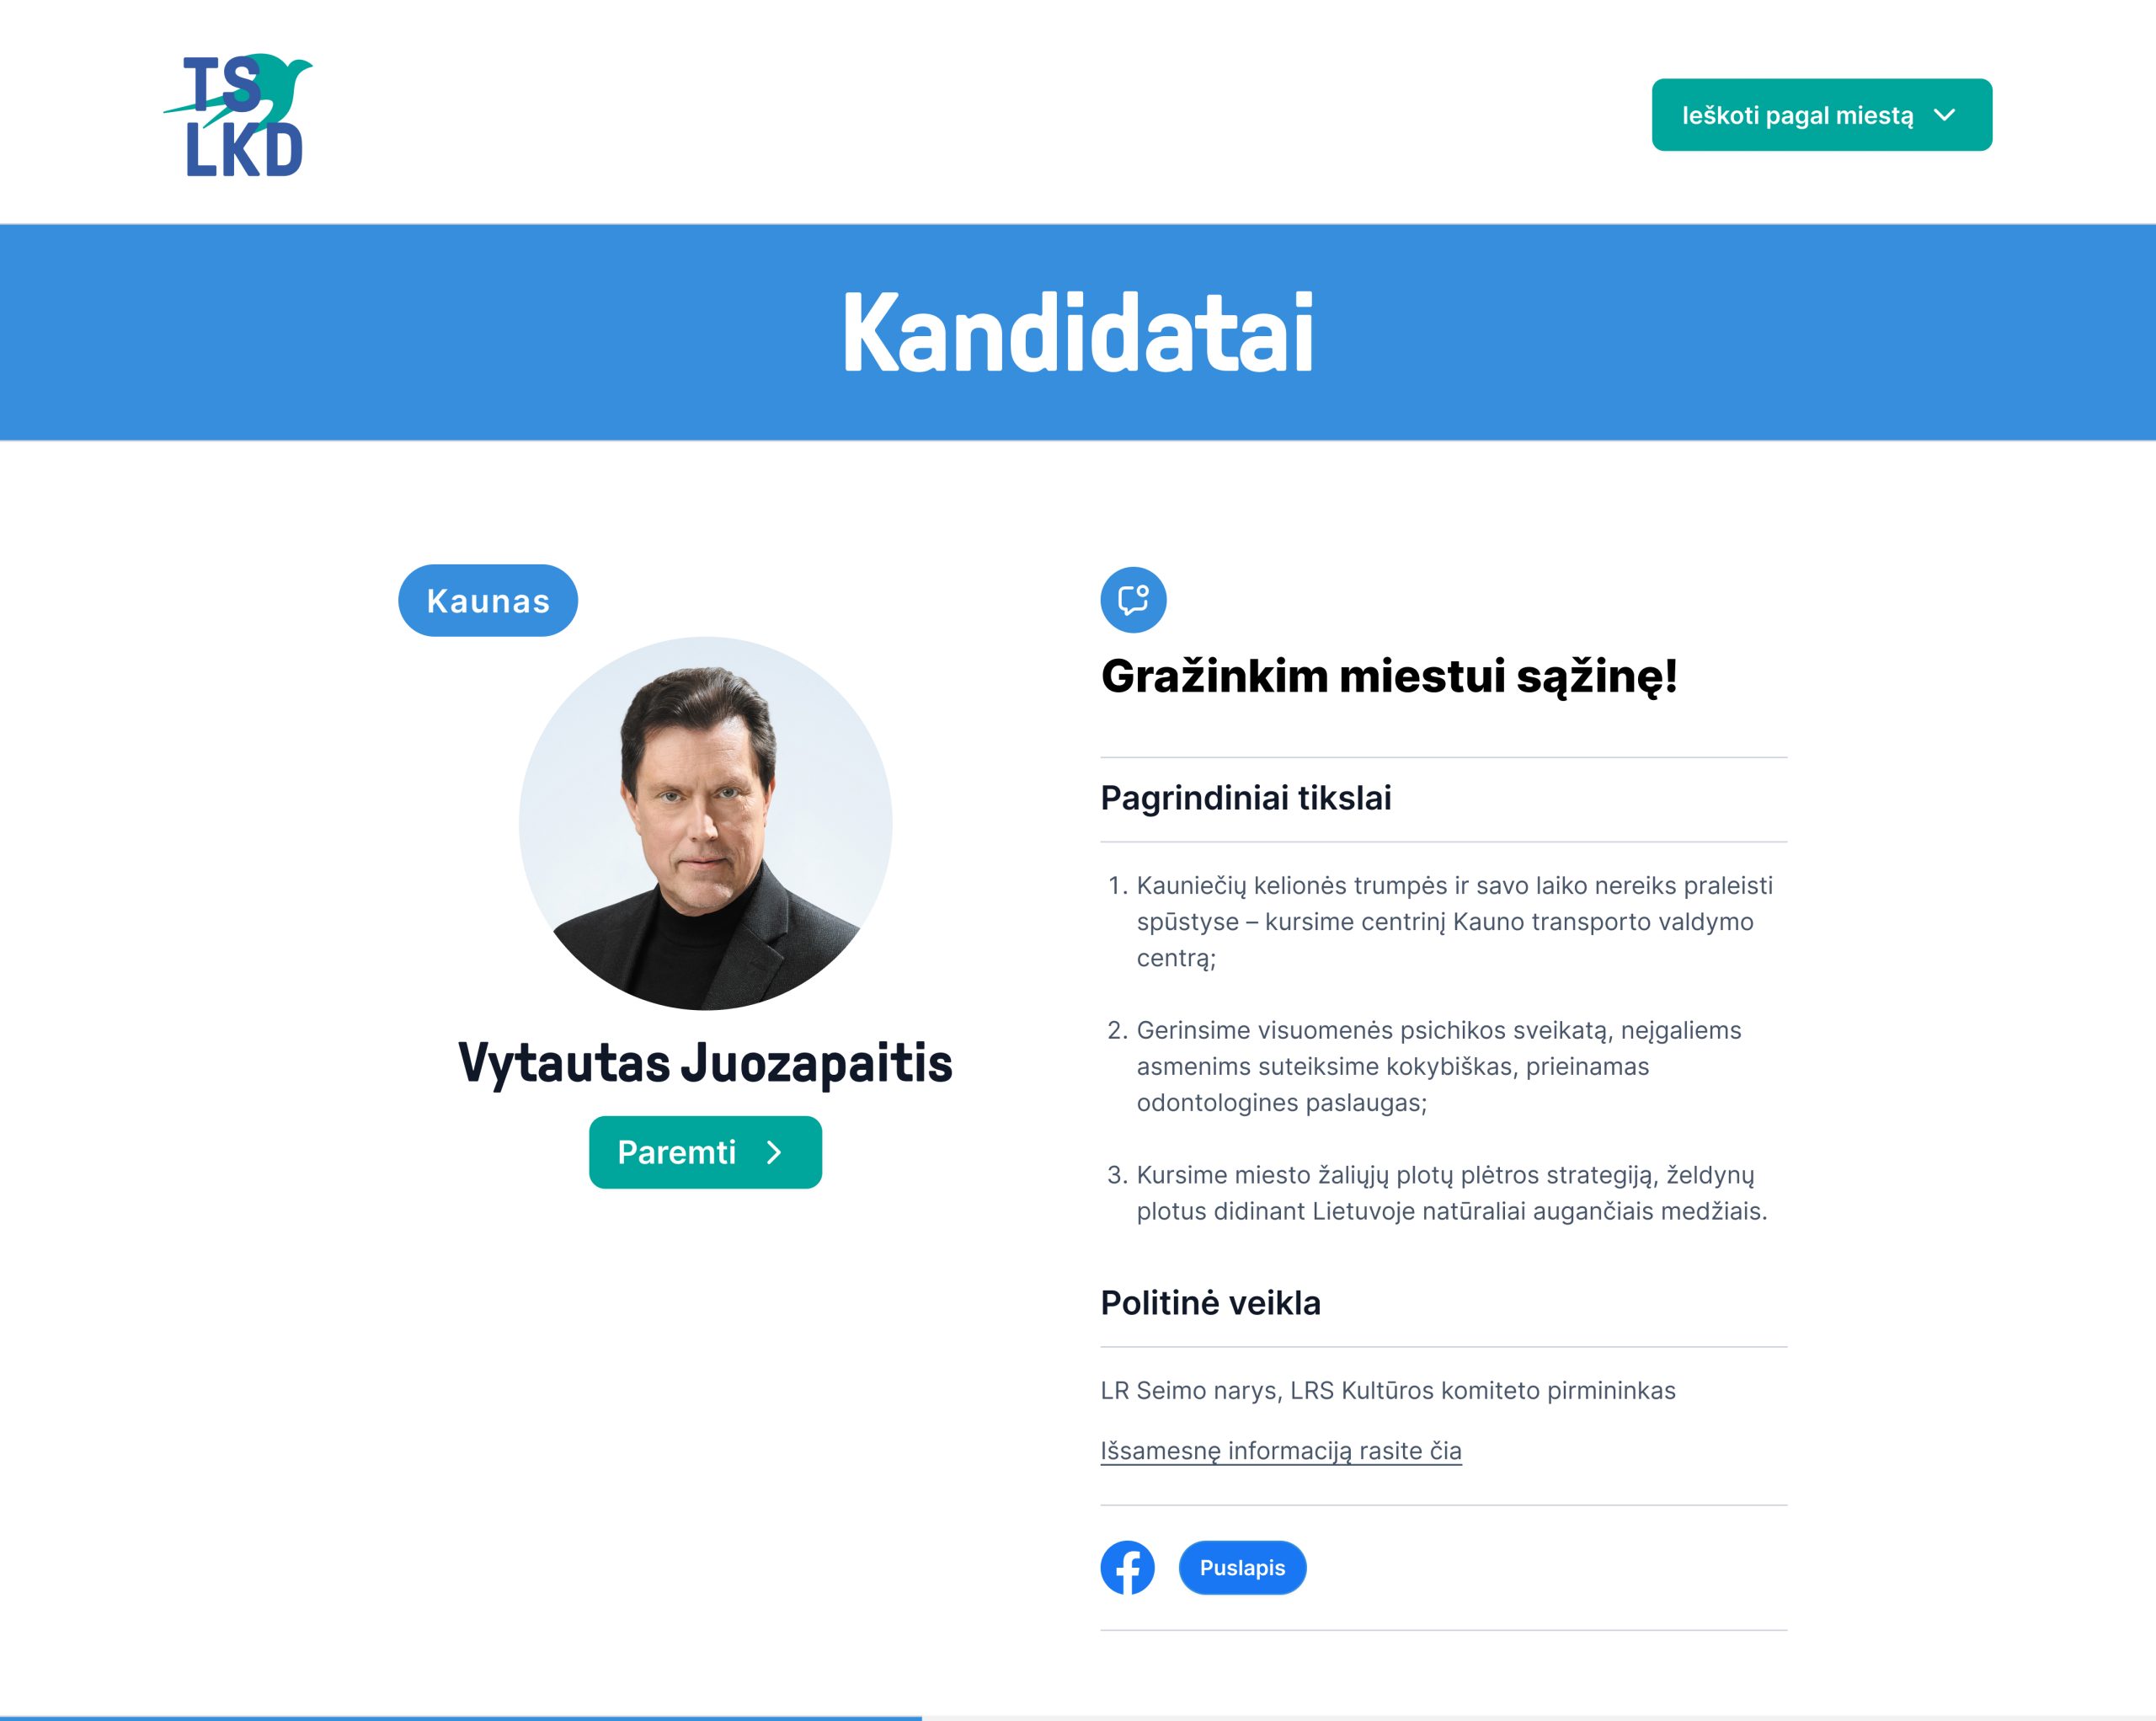 GPYR / Developing a website for mayoral candidates of the TS-LKD party in 57 Lithuanian municipalities - candidate's cv and slogan